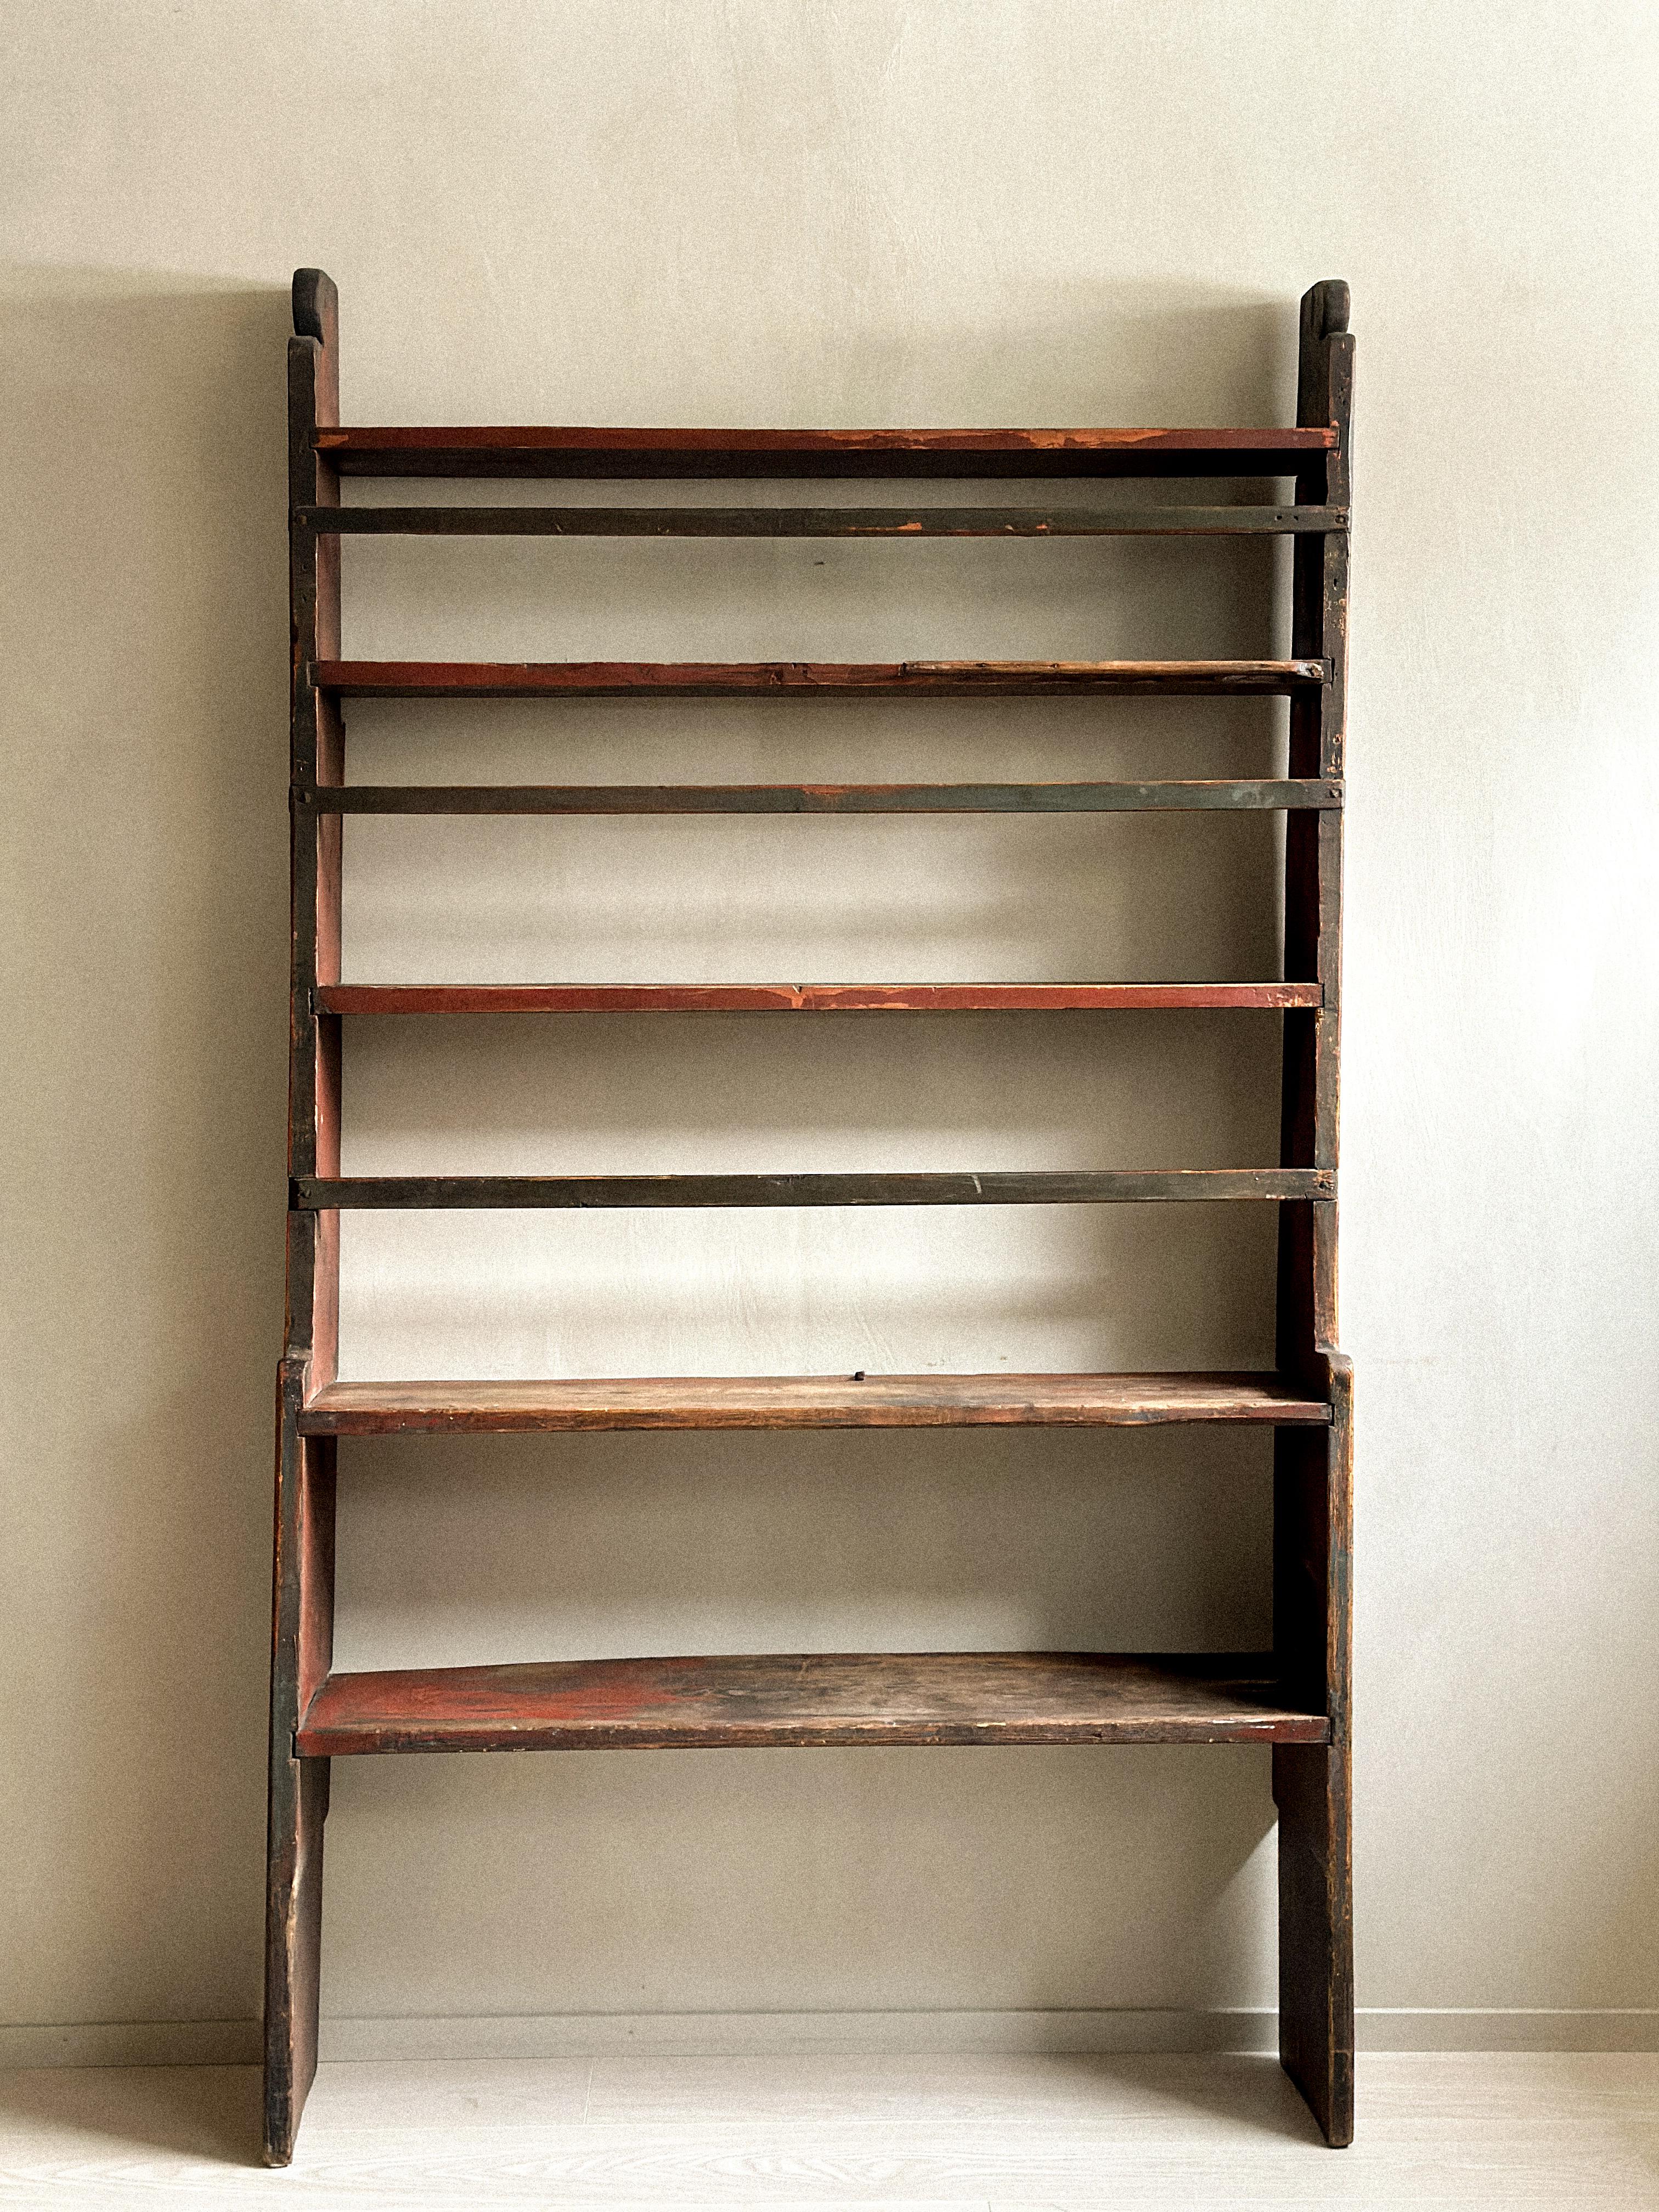 Beautiful antique book shelf in pine. Handcrafted by a Norwegian cabinetmaker in the mid 1800s.

A great vintage book shelf with a lovely patina. Should be attached to a wall to ensure stability. 

A unique rustic piece that fit in the wabi sabi